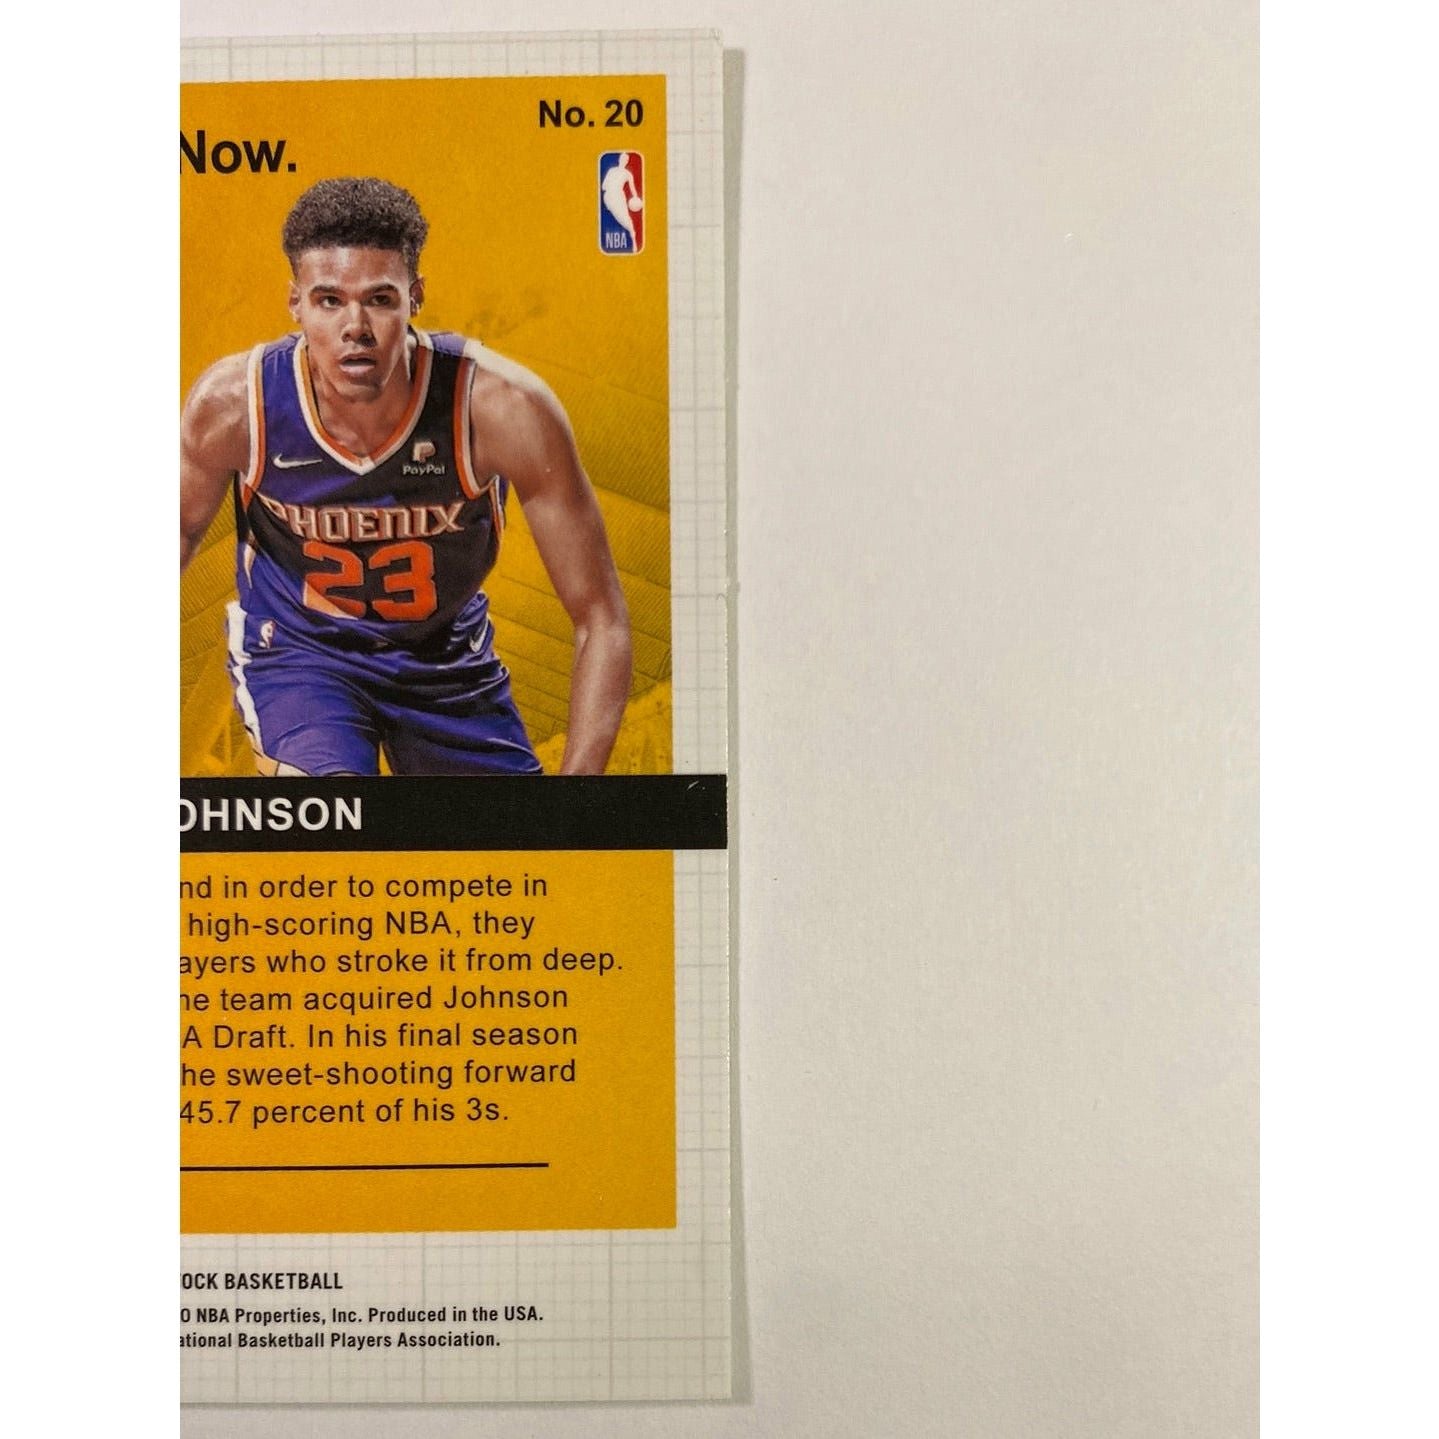  2019-20 Hoops Premium Stock Cameron Johnson Arriving Now  Local Legends Cards & Collectibles